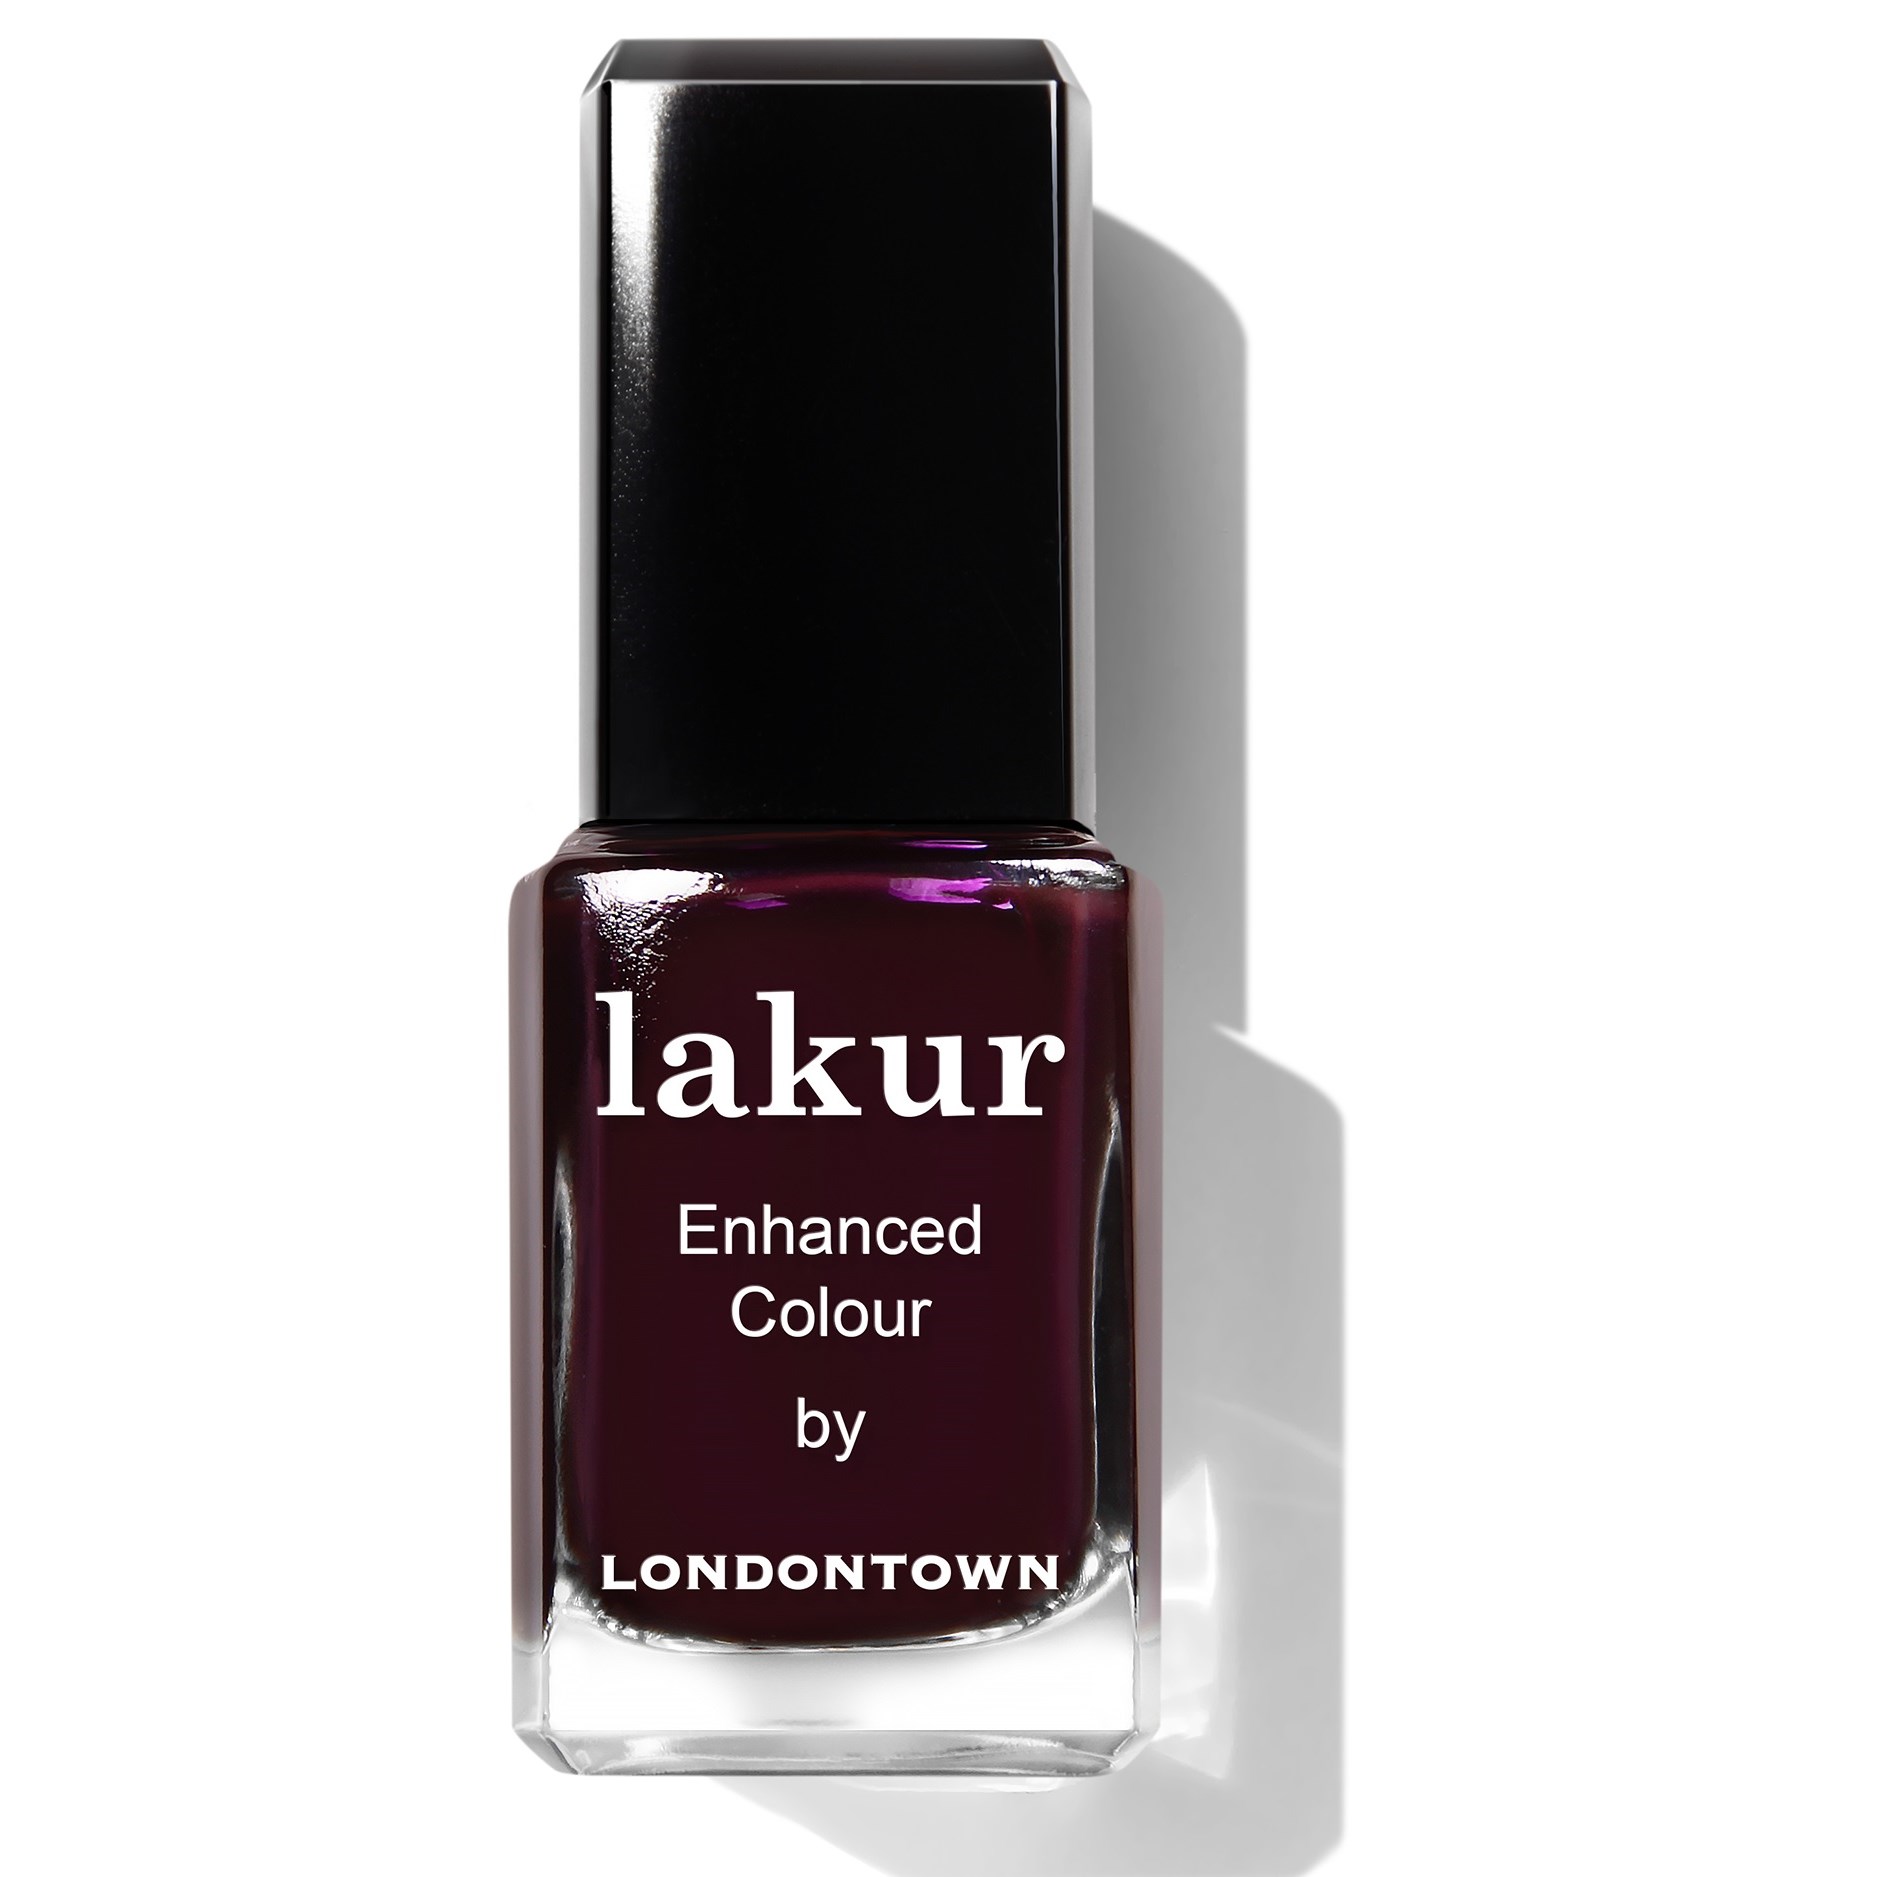 LONDONTOWN Nail Lakur Bell in Time